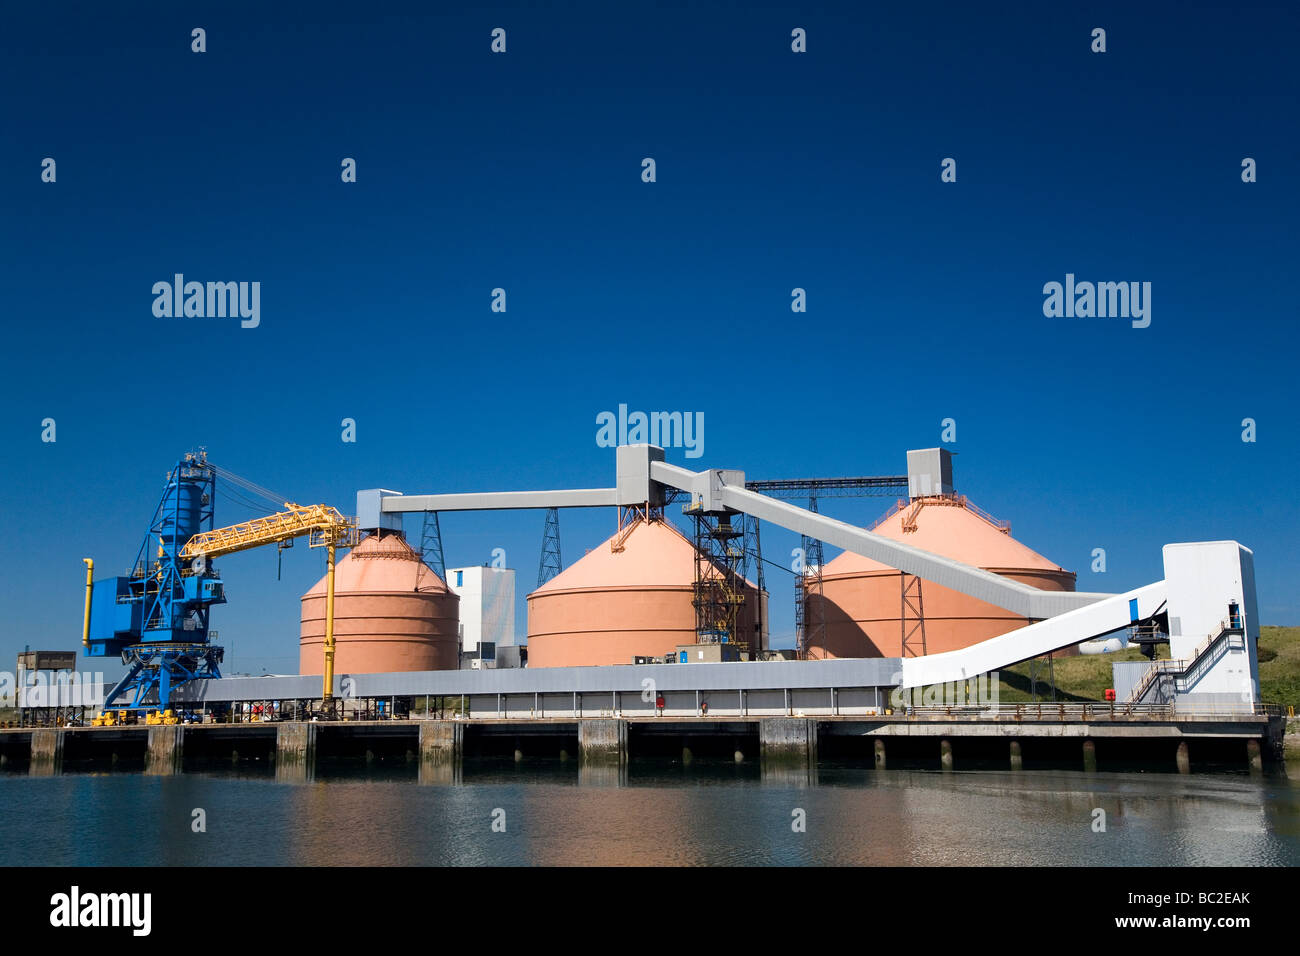 The aluminium smelting plant at Blyth in northern England. Stock Photo